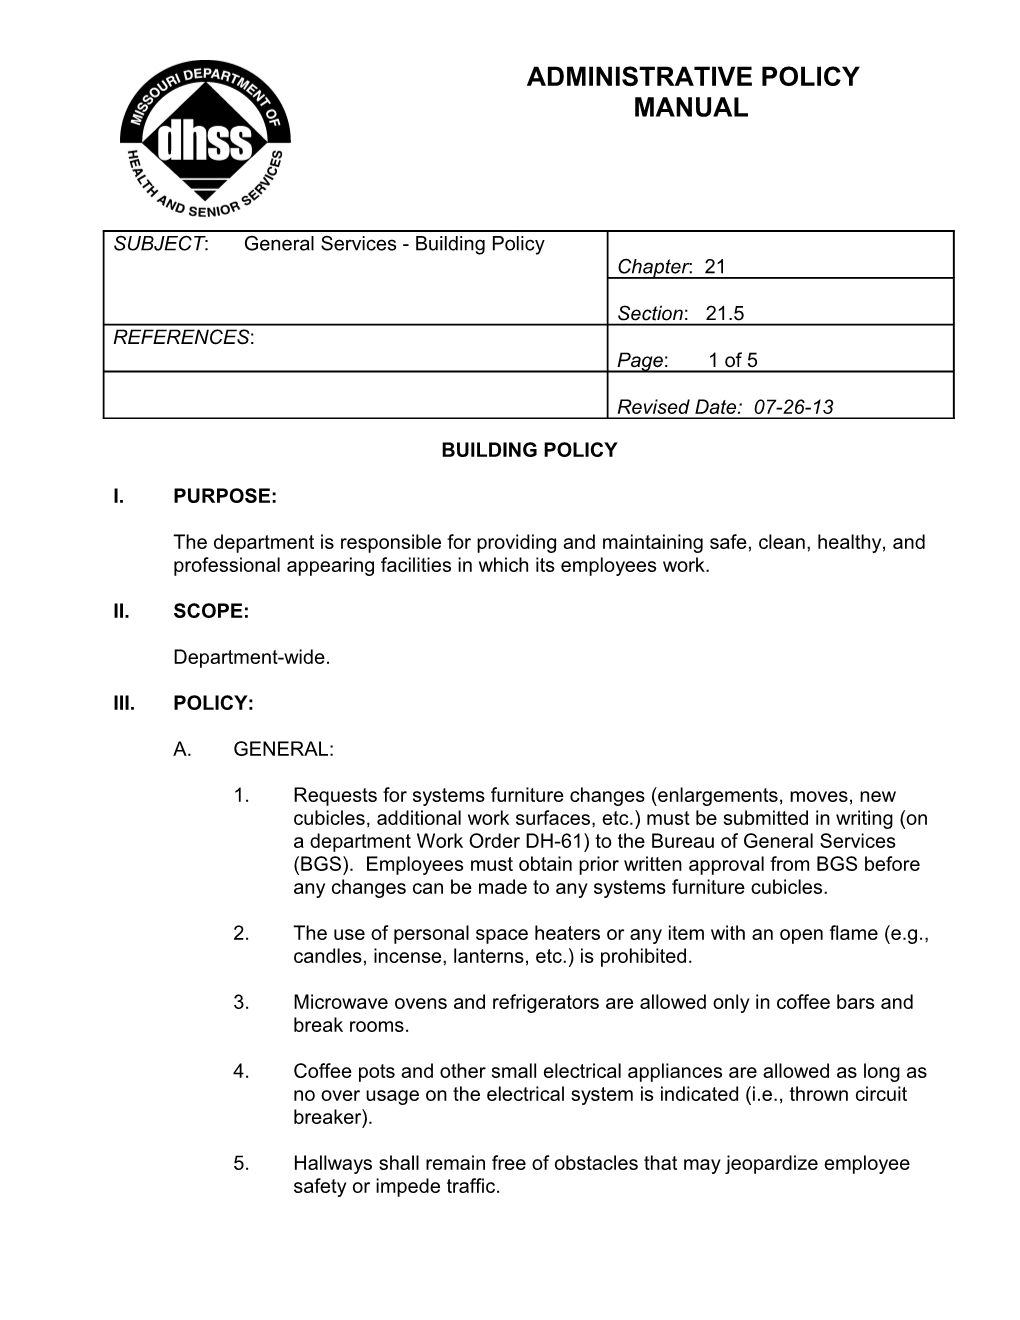 SUBJECT: General Services - Building Policy